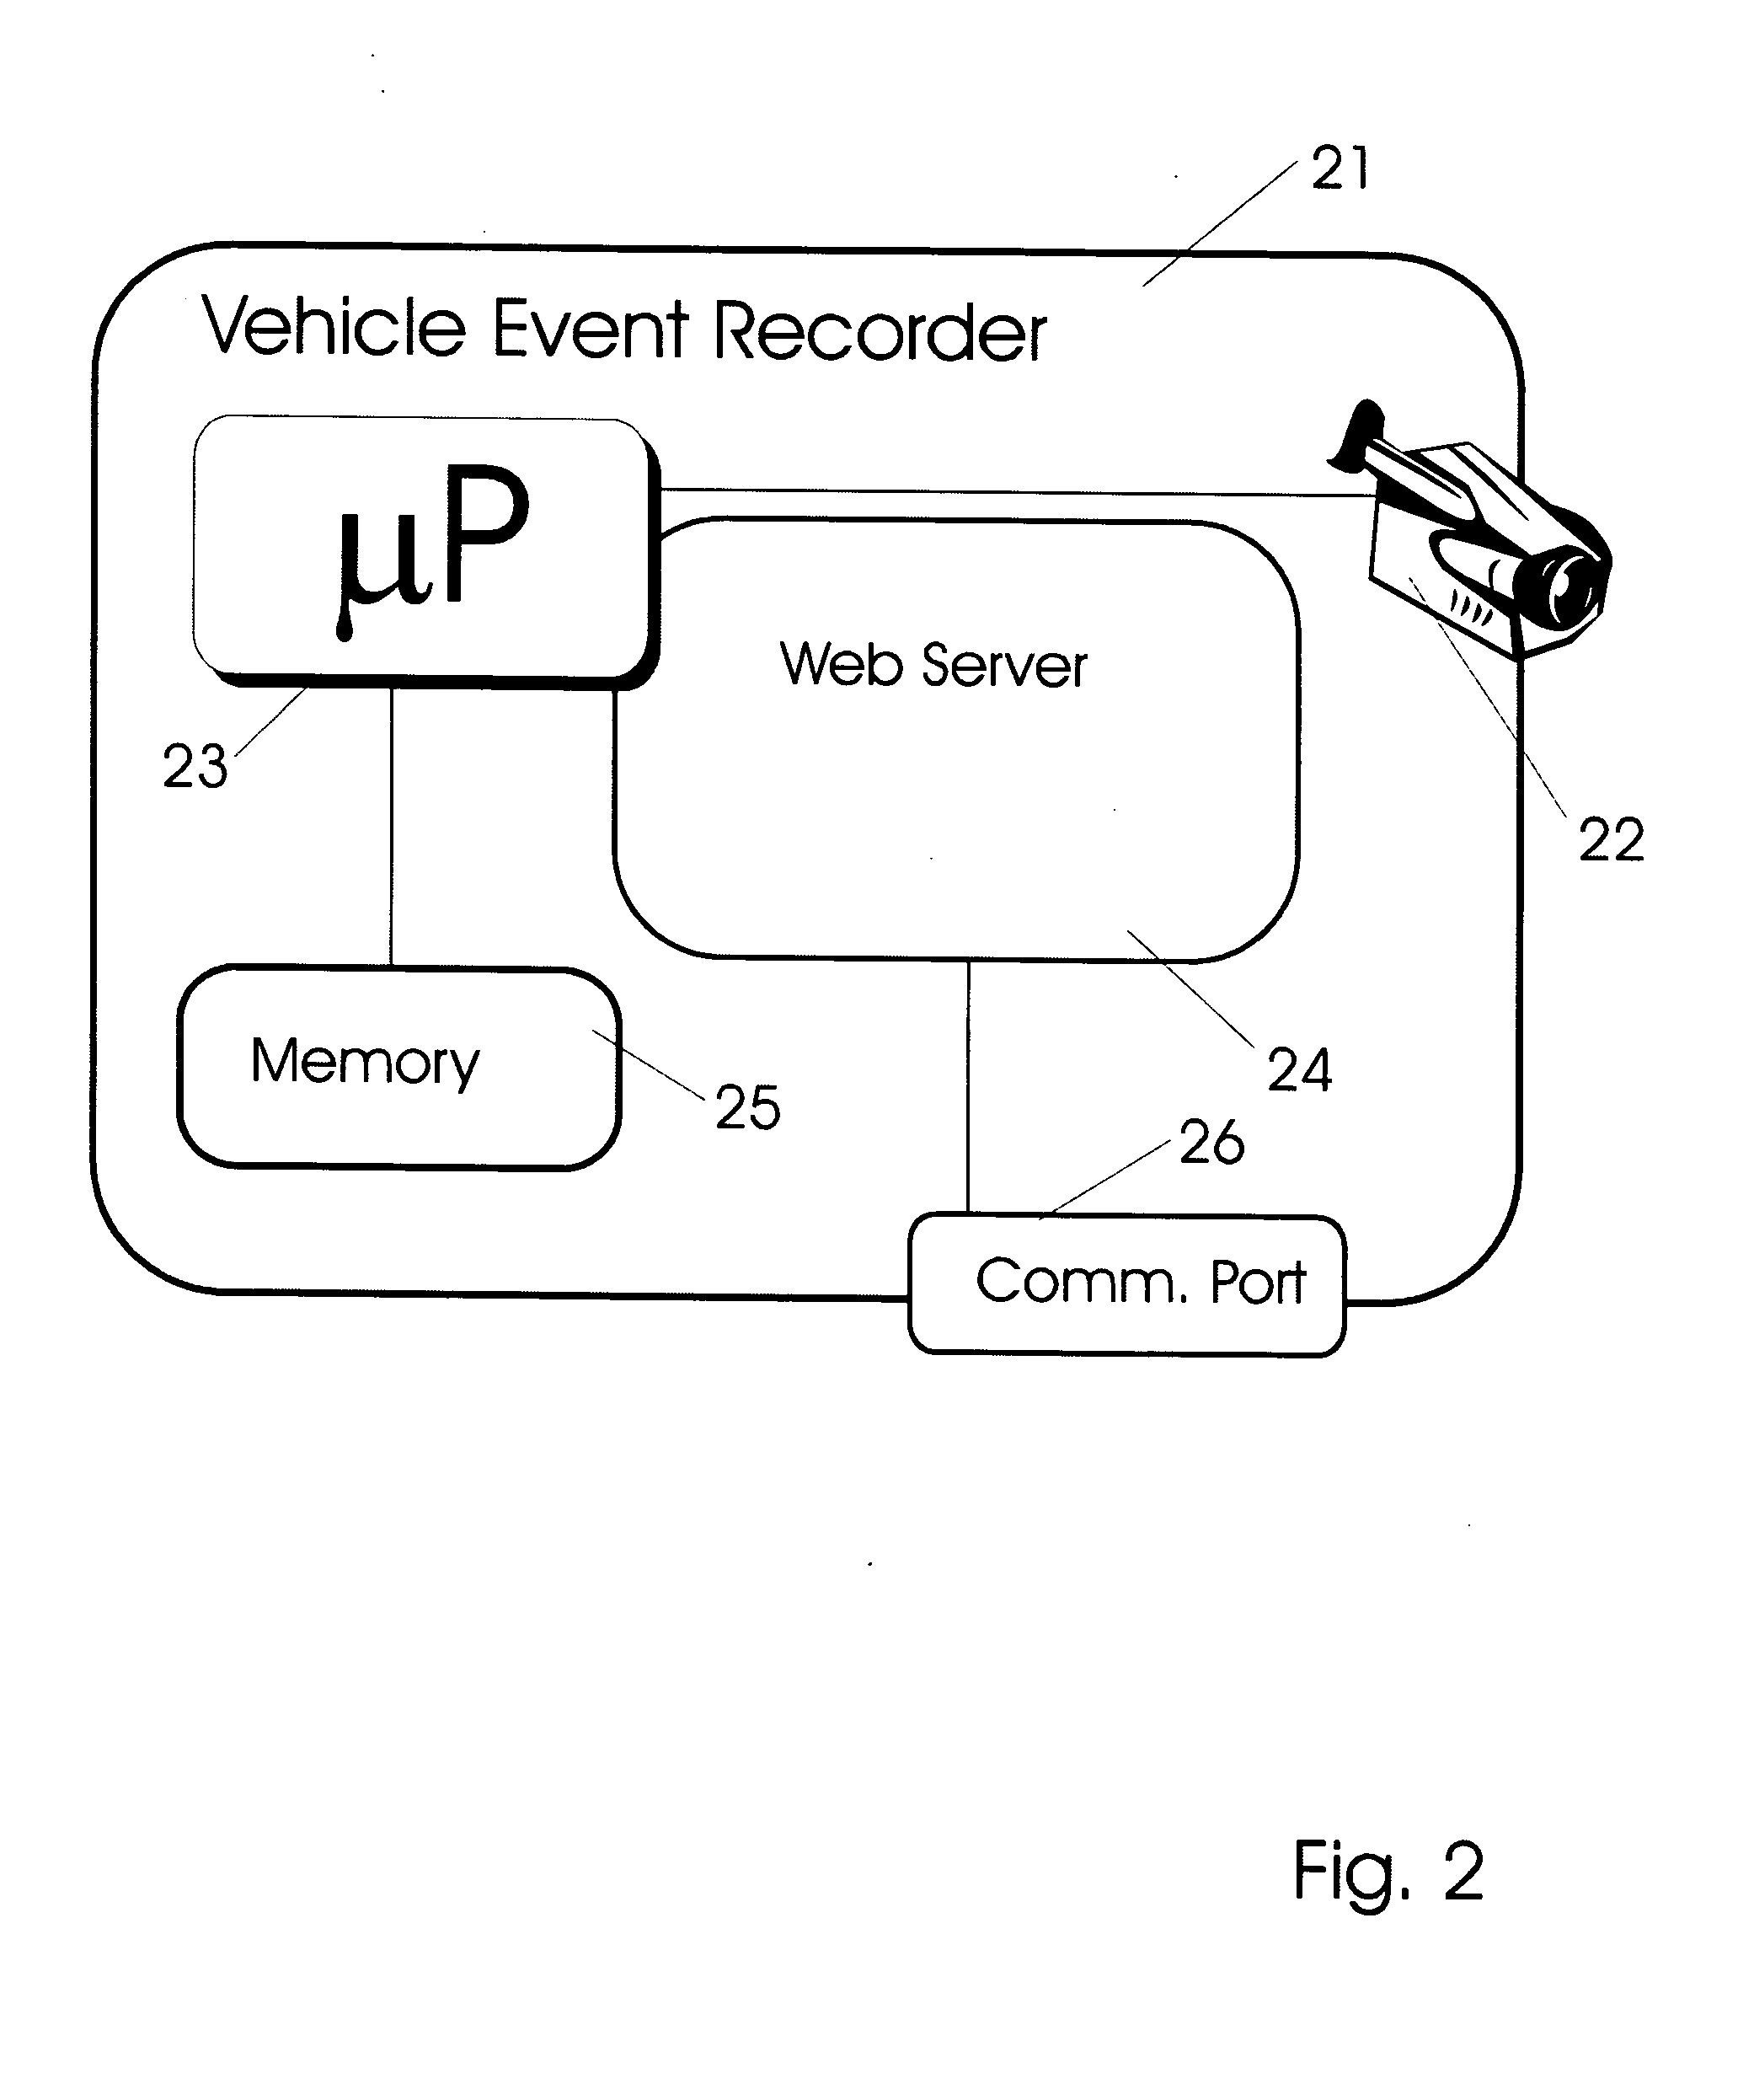 Vehicle event recorders with integrated web server